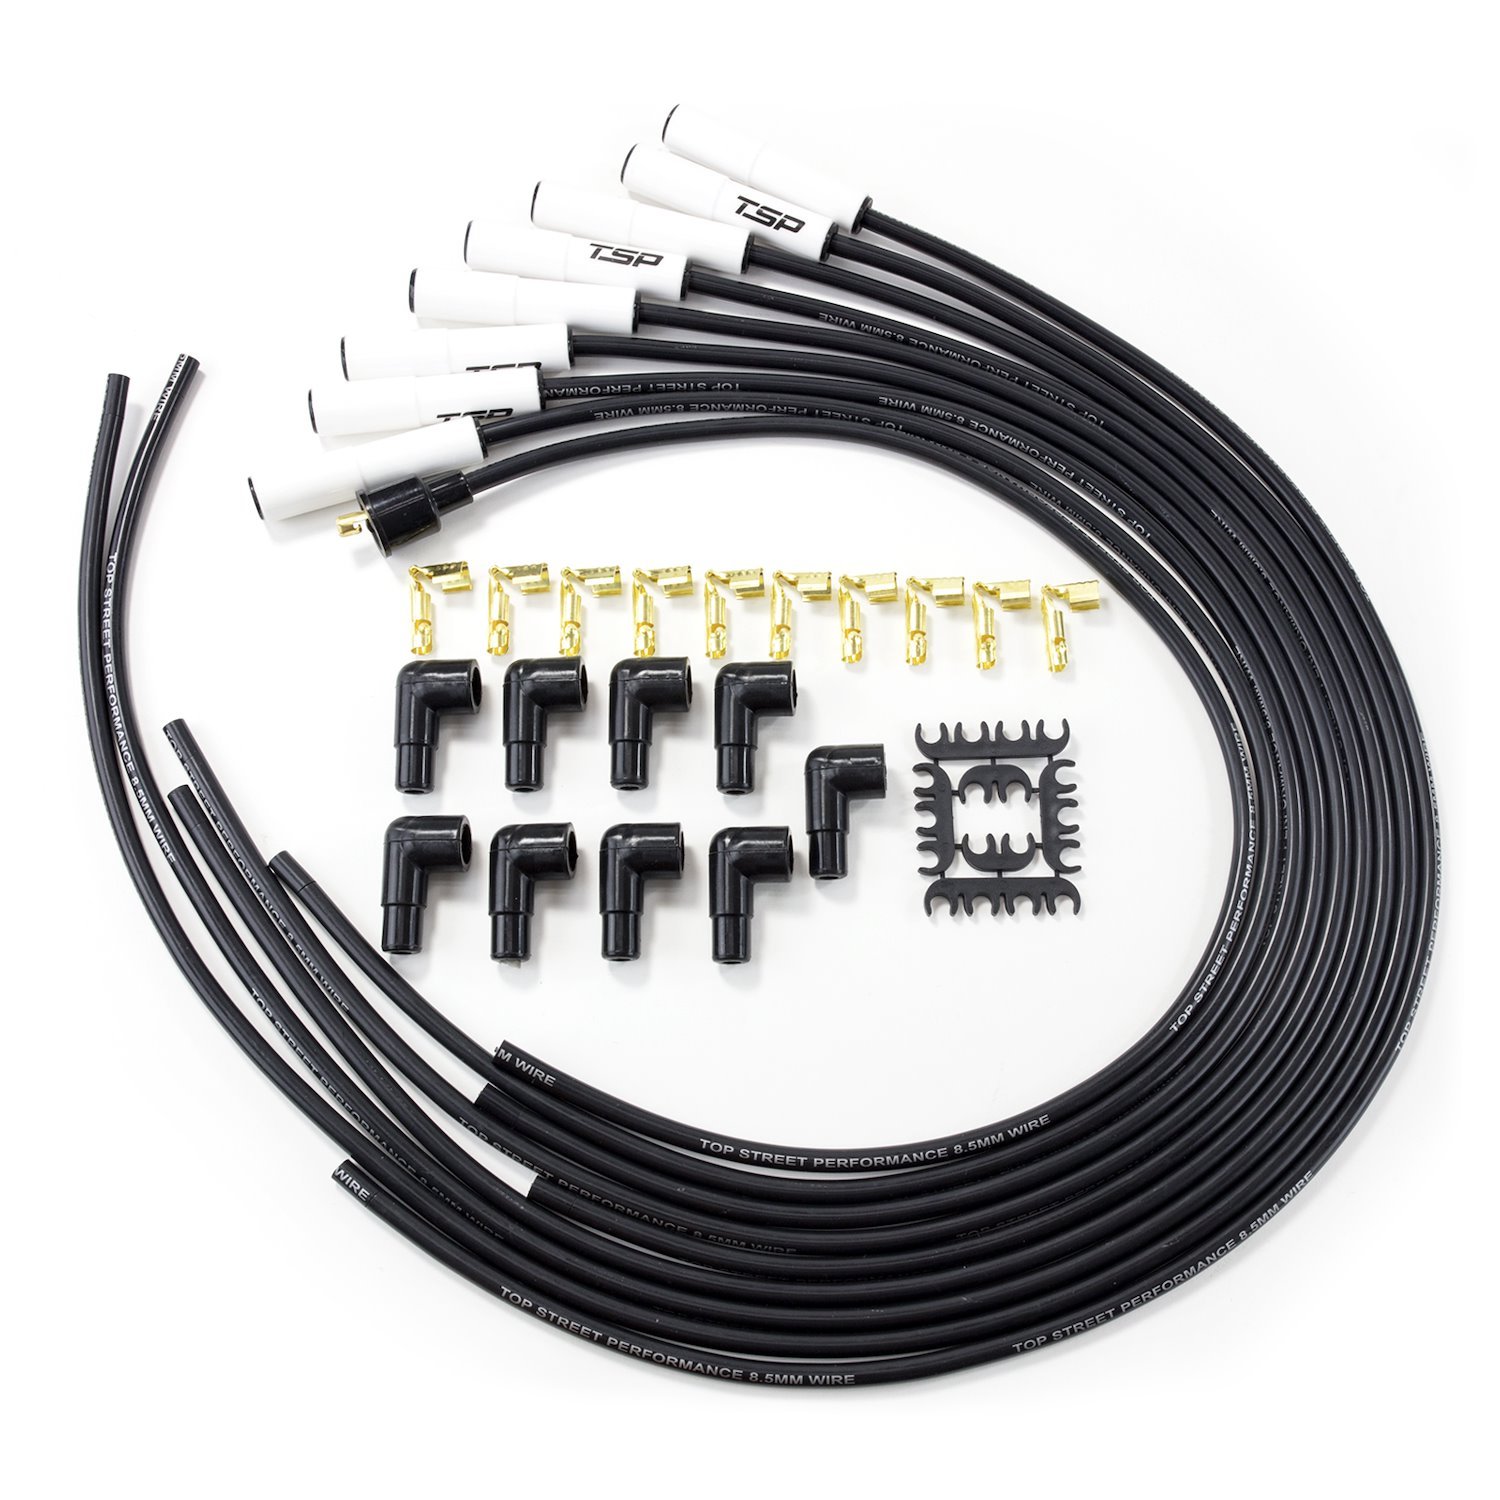 85080CE Universal Ignition Wires, 8.5mm Black, Straight Ceramic Plug Boots